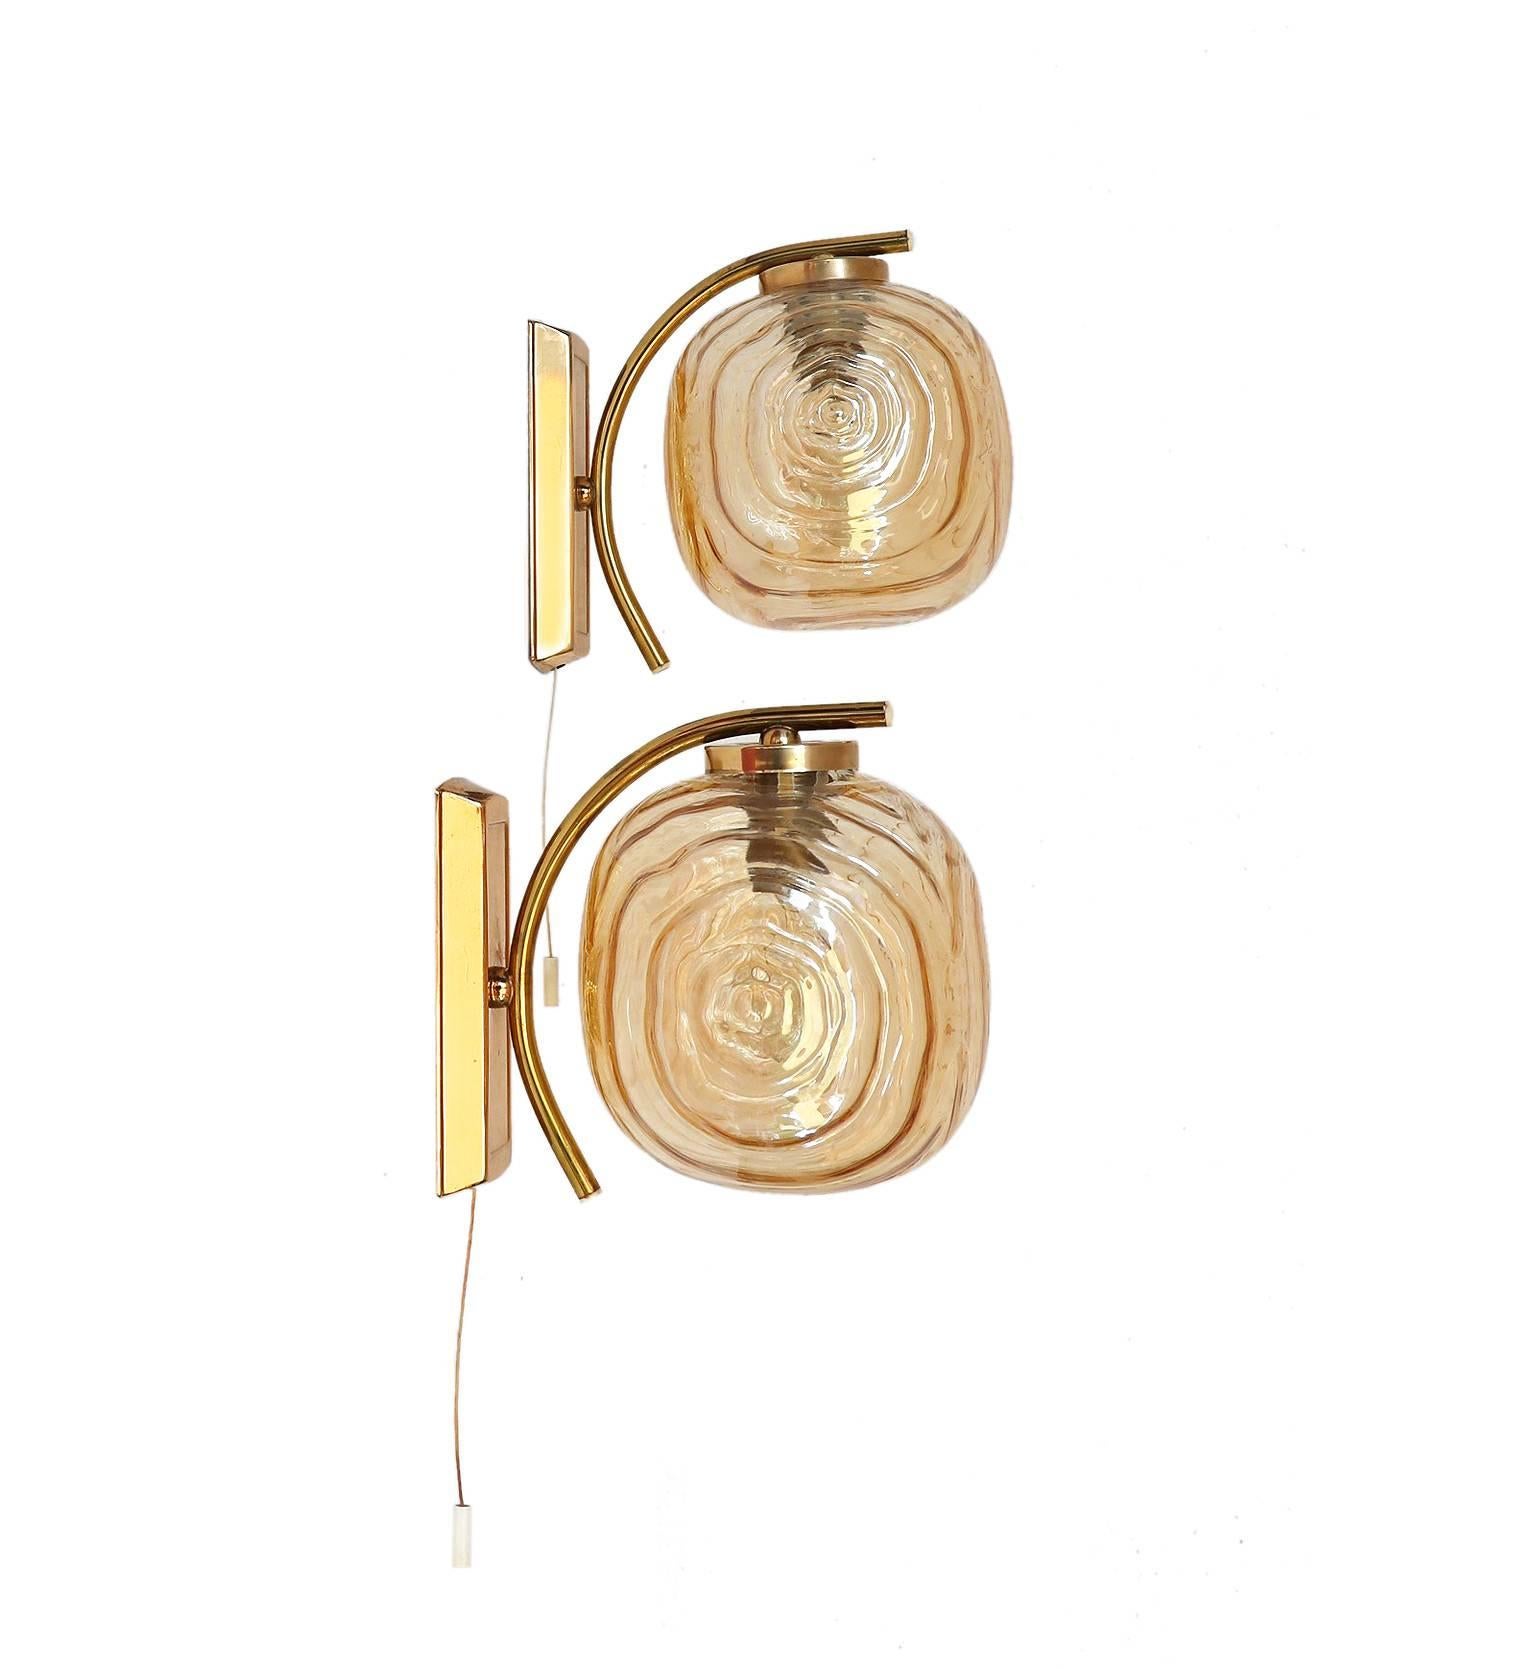 Pair of amber iridescent glass wall sconces made by Glashütte Limburg, Germany in the 1960s.
Each frame with one small Edison base bulb.